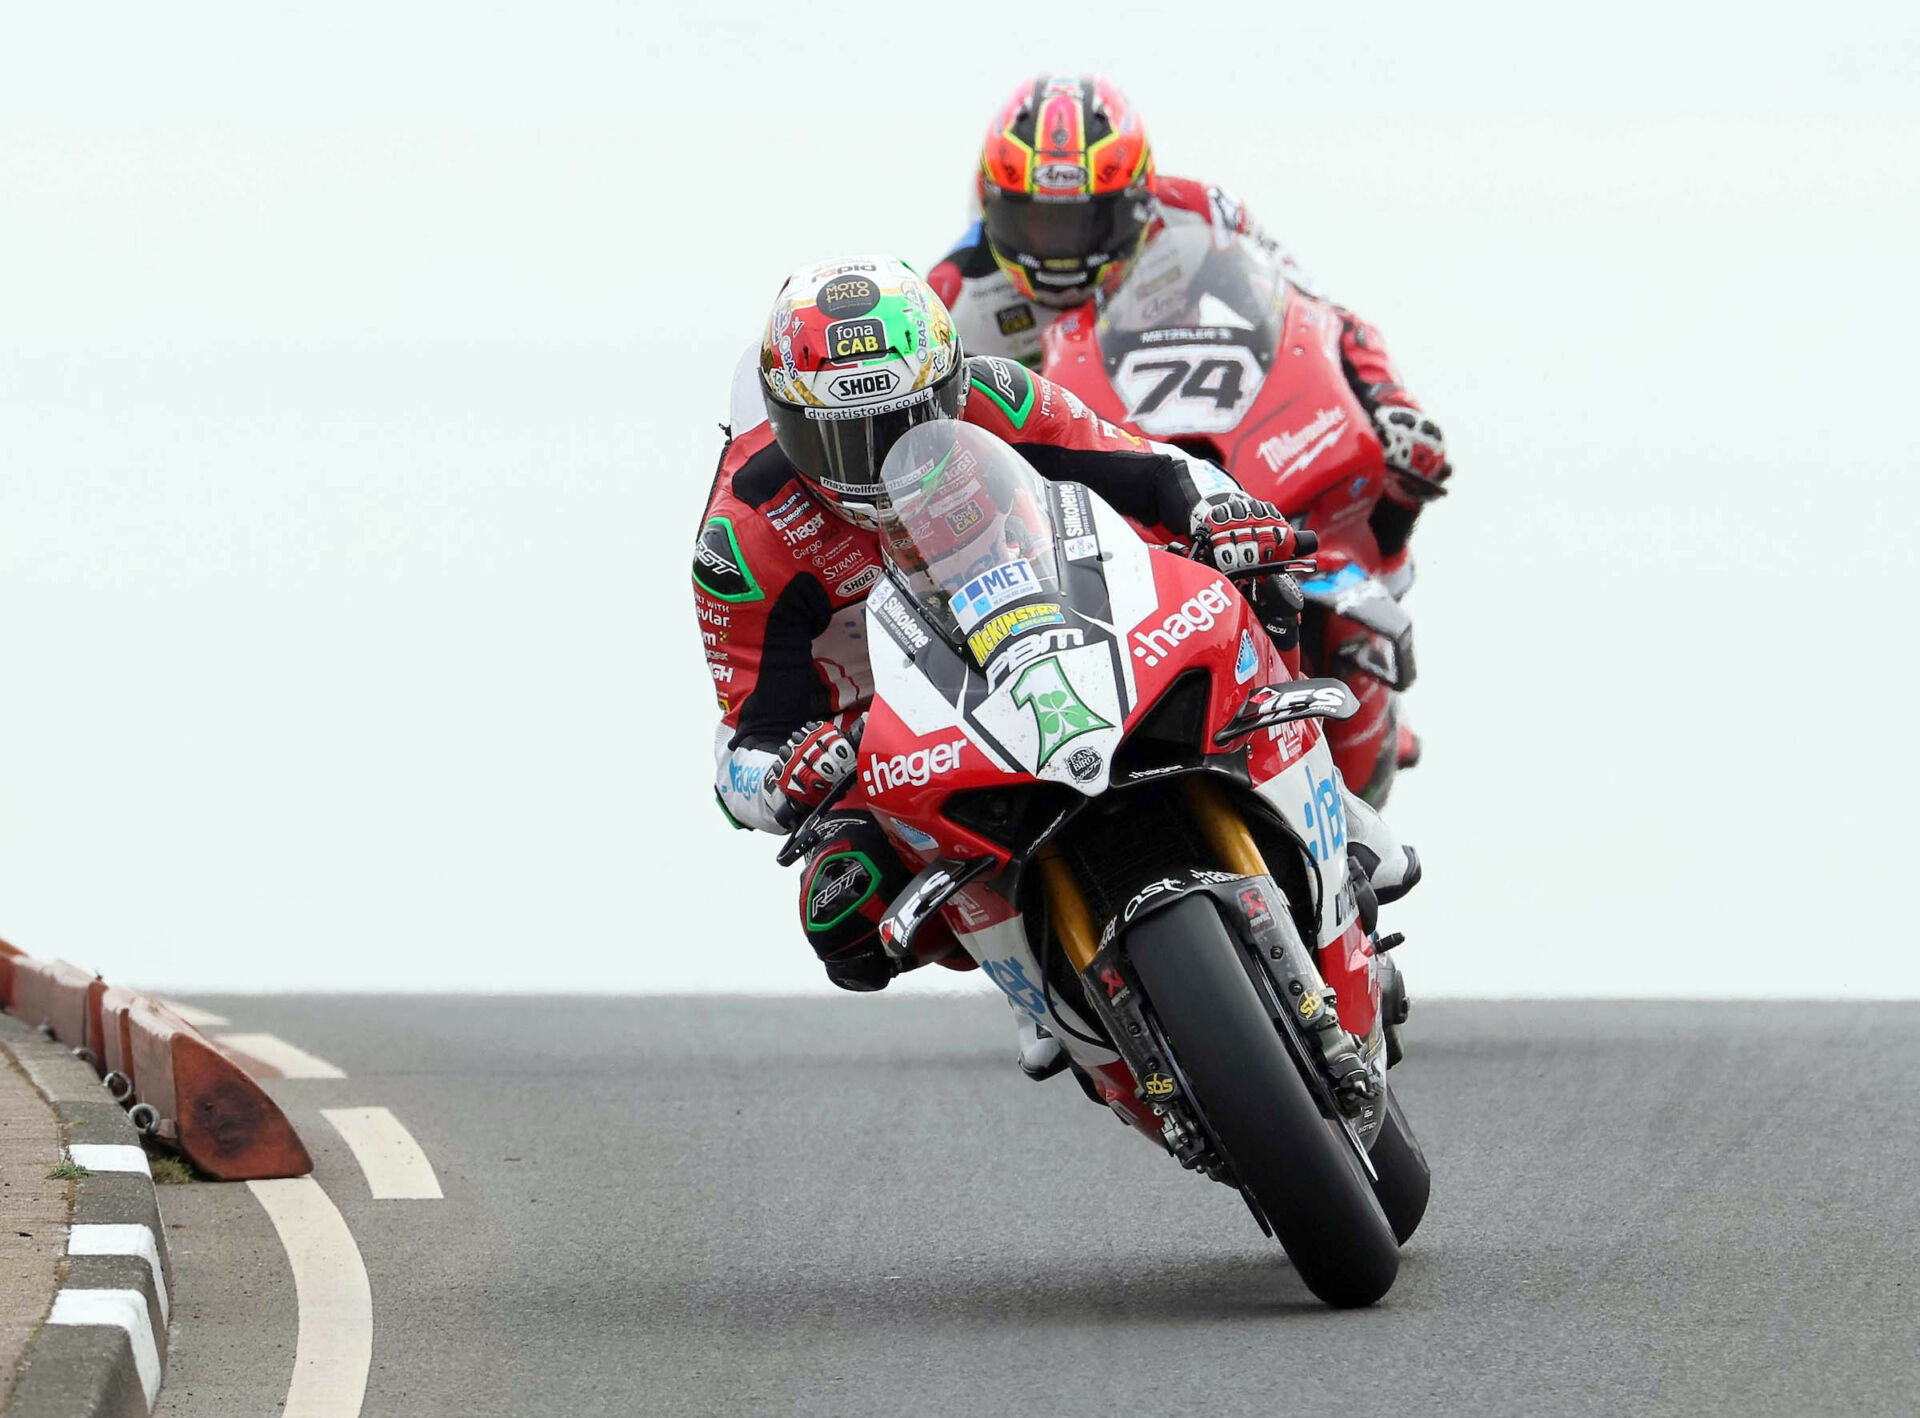 Glenn Irwin (1) broke the lap record during Superbike qualifying Wednesday at the North West 200. Photo by Pacemaker Press International, courtesy NW200 Press Office.